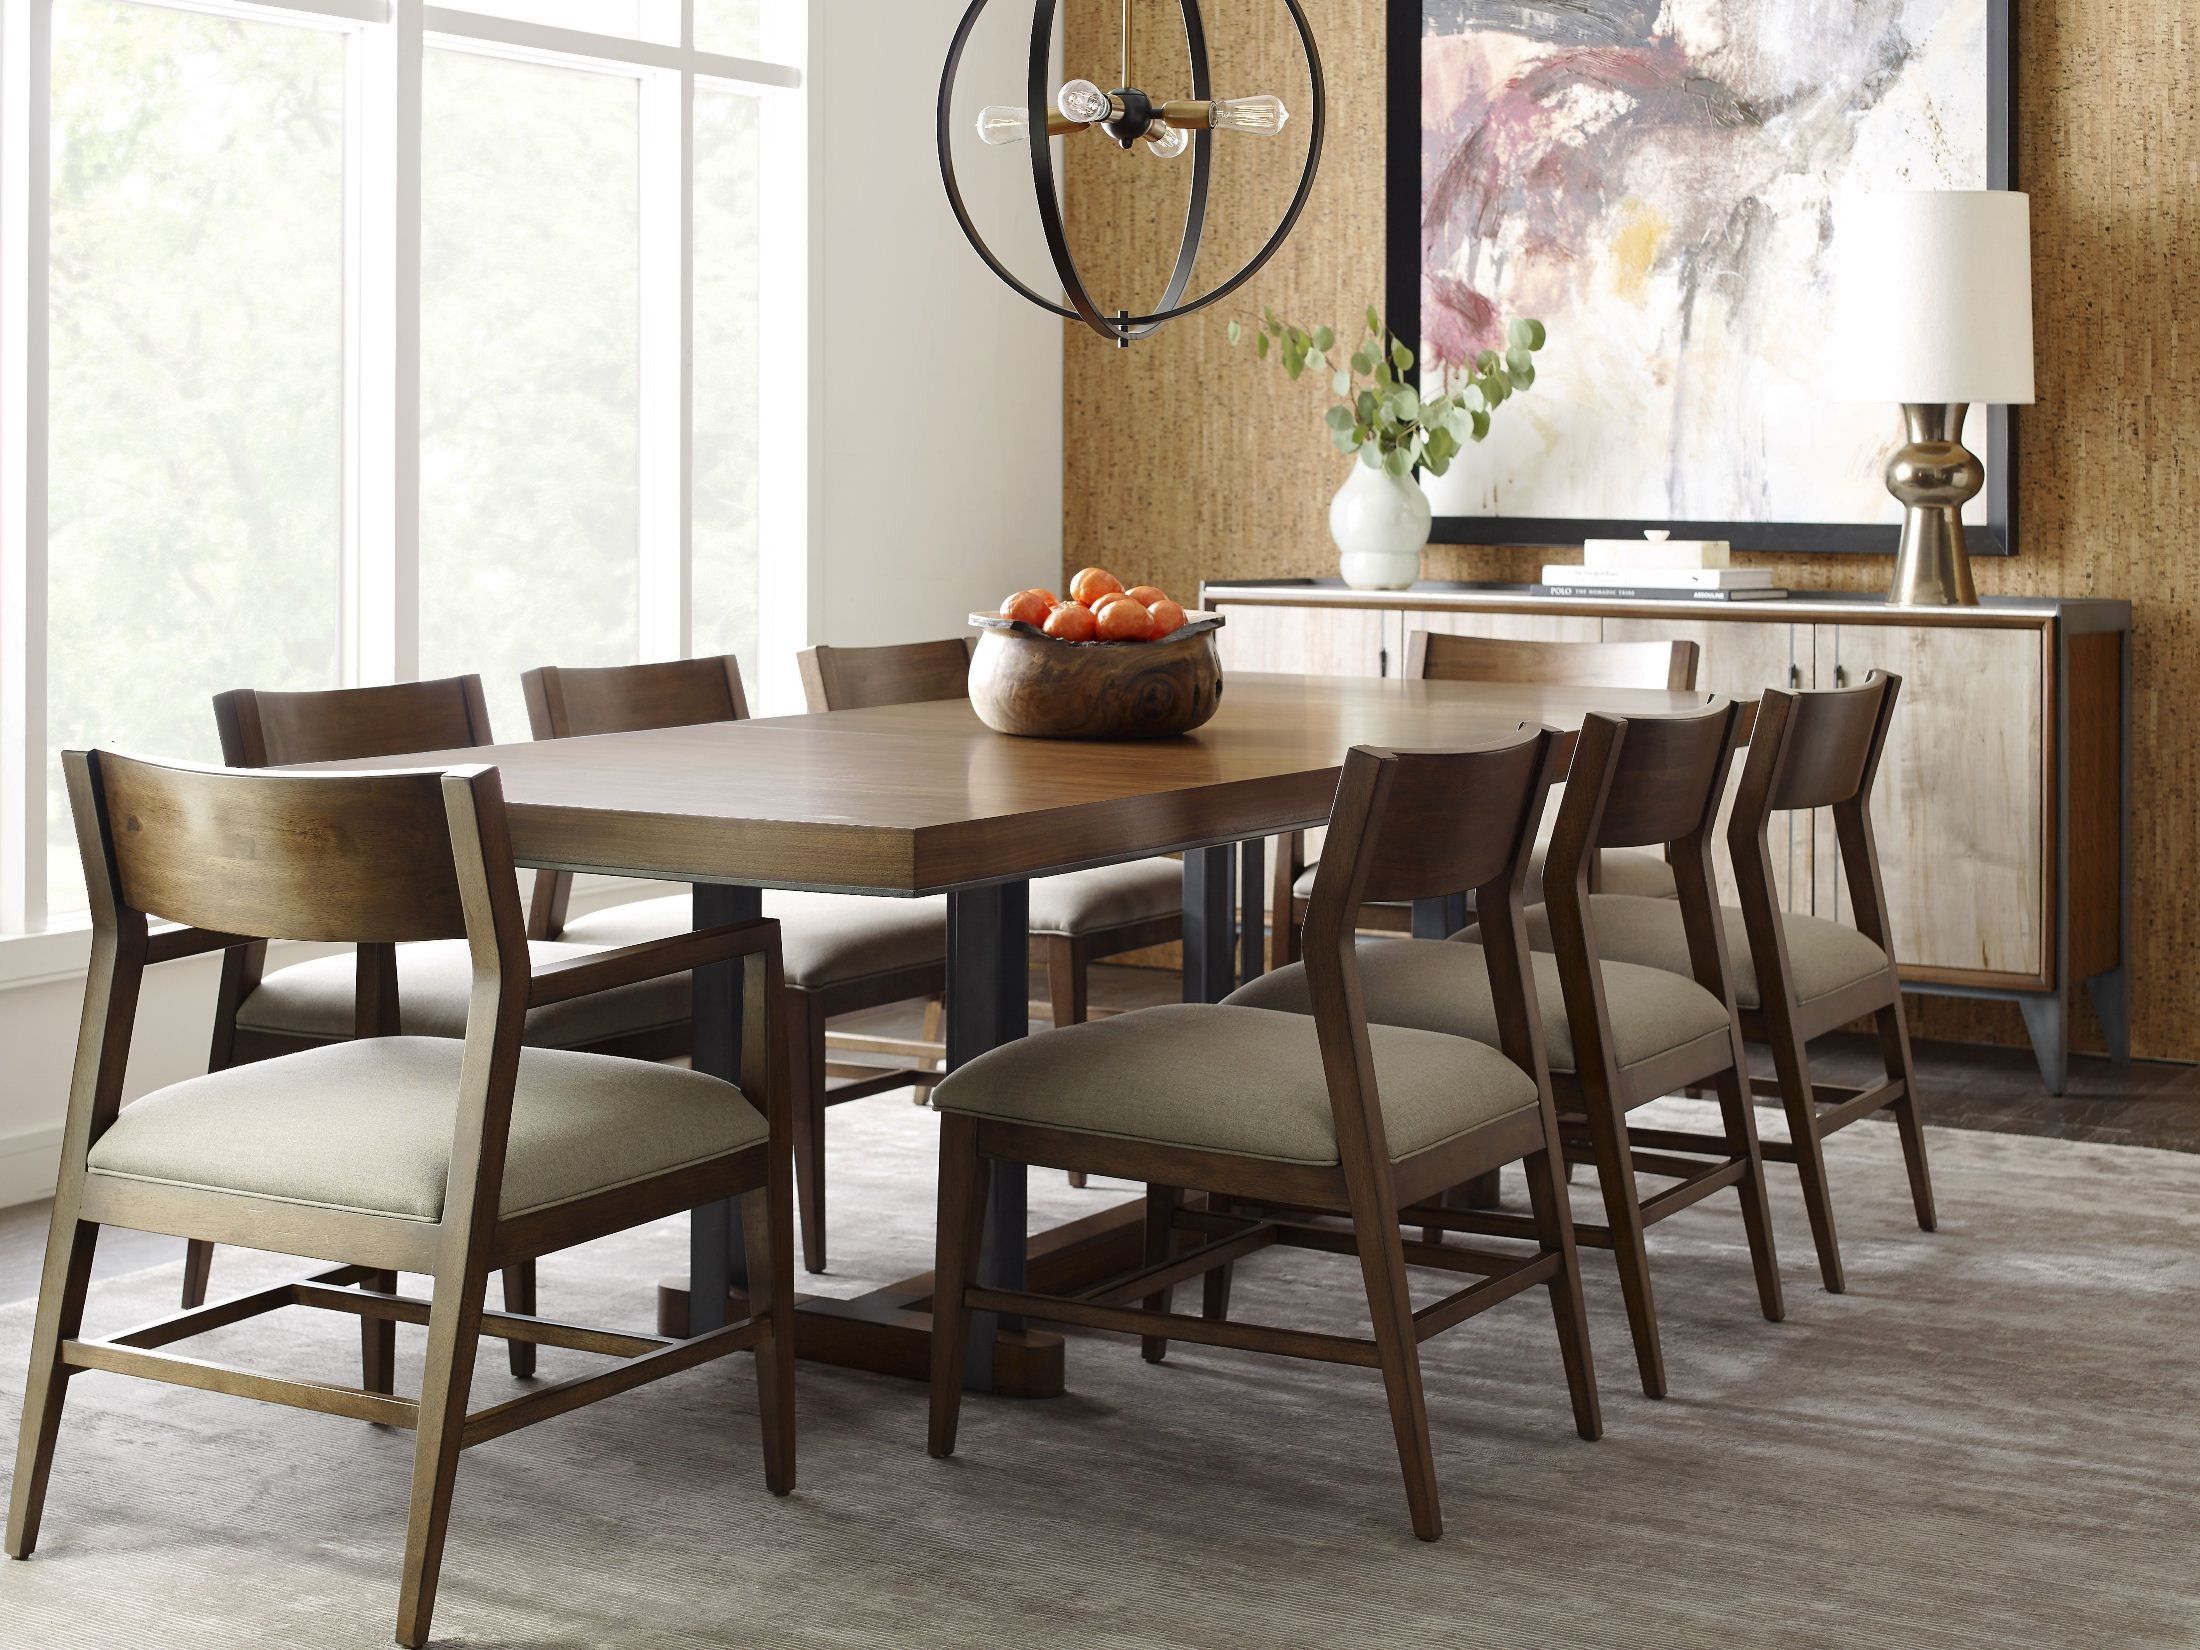 Ad Modern Synergy Walnut Curator Rectangular Dining Table With Regard To Most Recently Released Natural Rectangle Dining Tables (View 4 of 15)